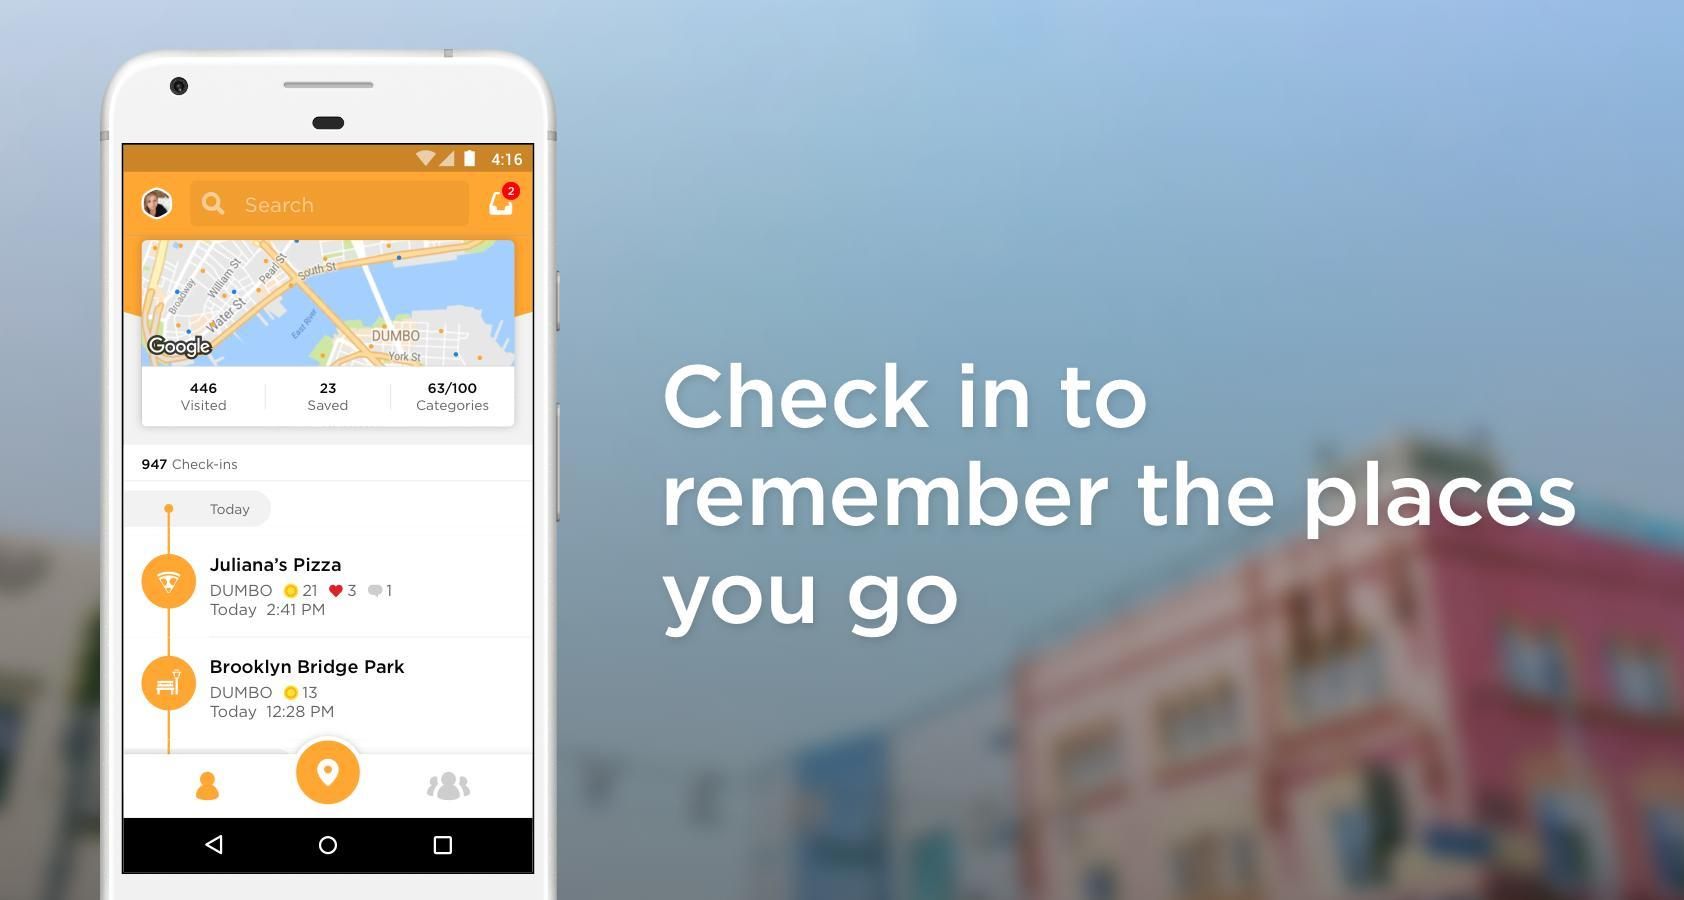 Foursquare - Every Traveler Should Download This App